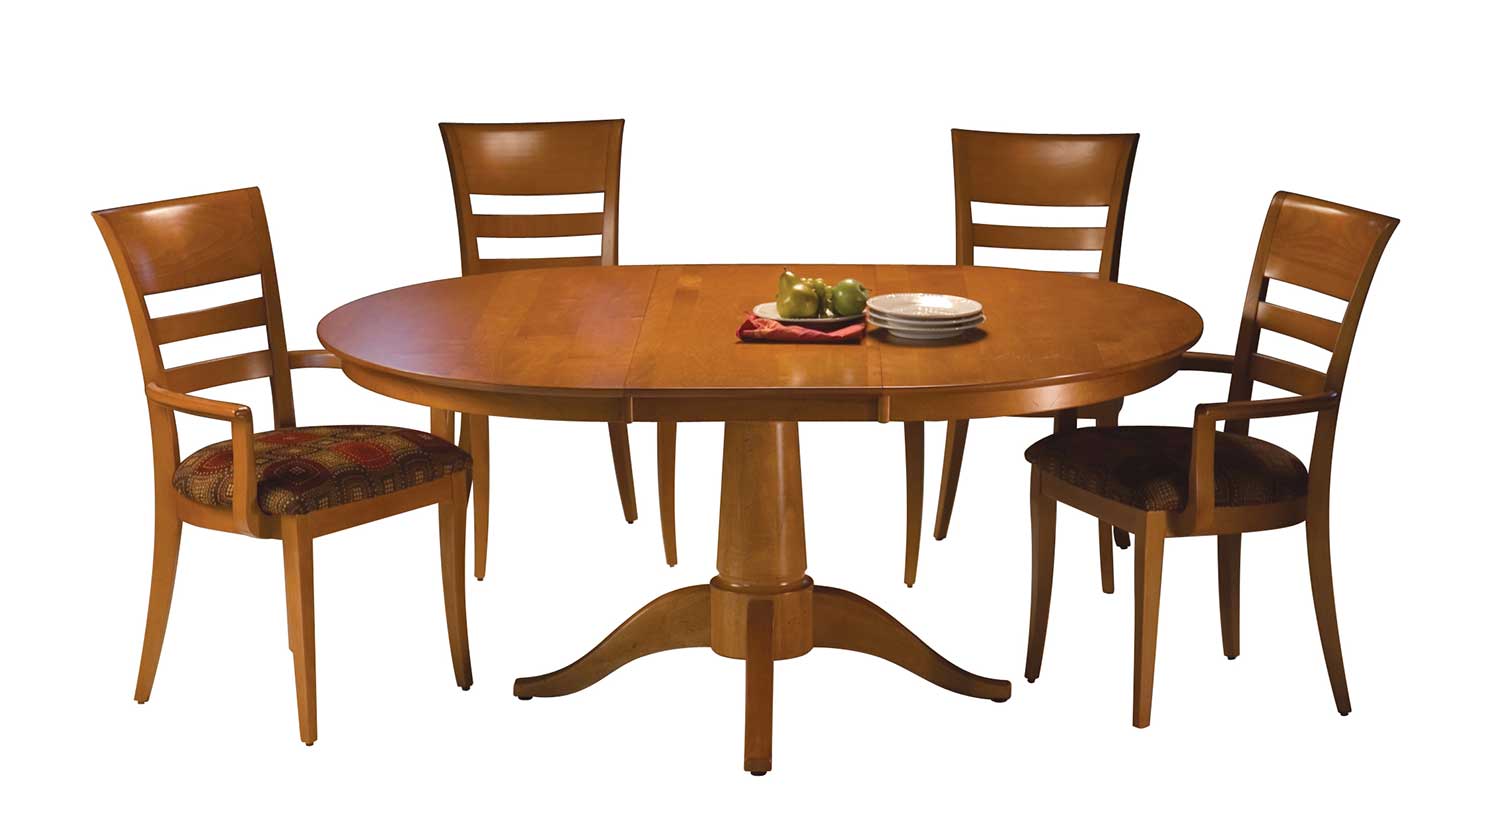 Circle Furniture Chelsea Dining Table Pedestal Tables Ma Circle Furniture